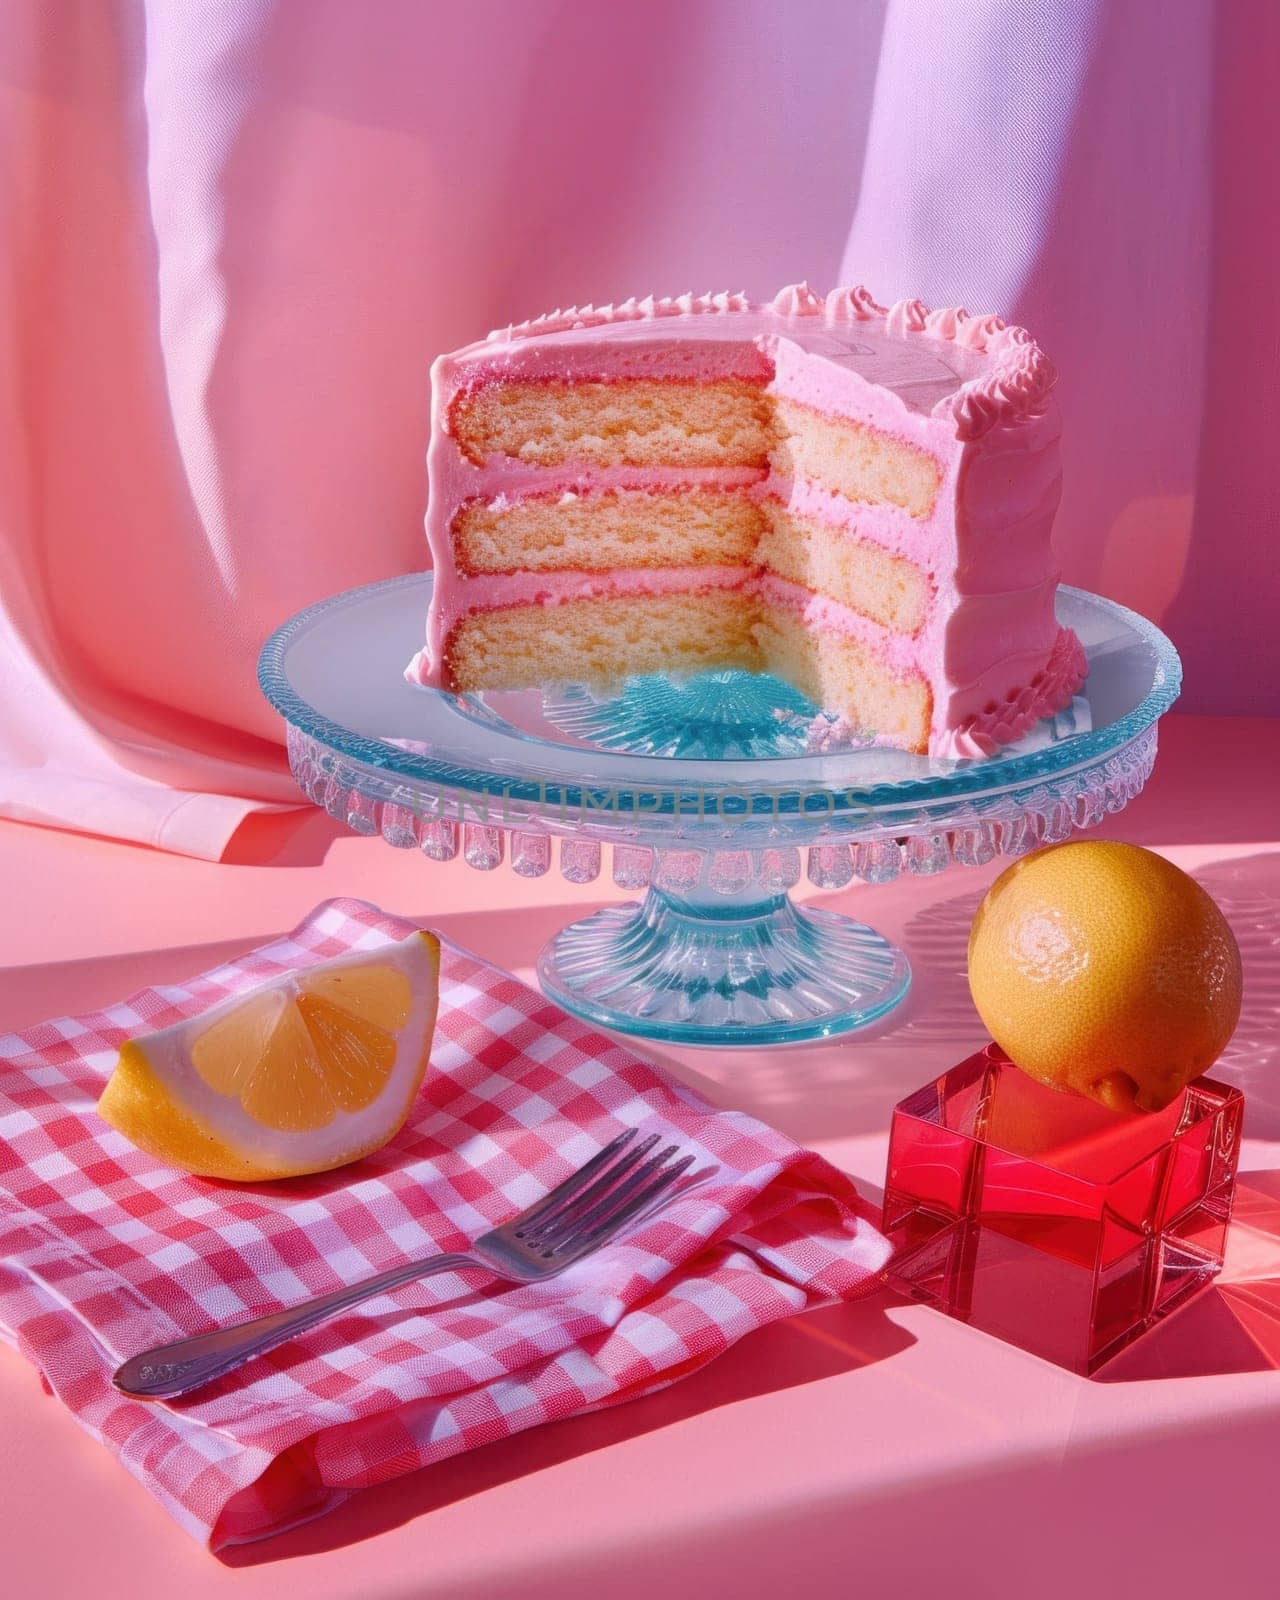 Pink cake slice with fork and knife on table for beauty and artistic indulgence